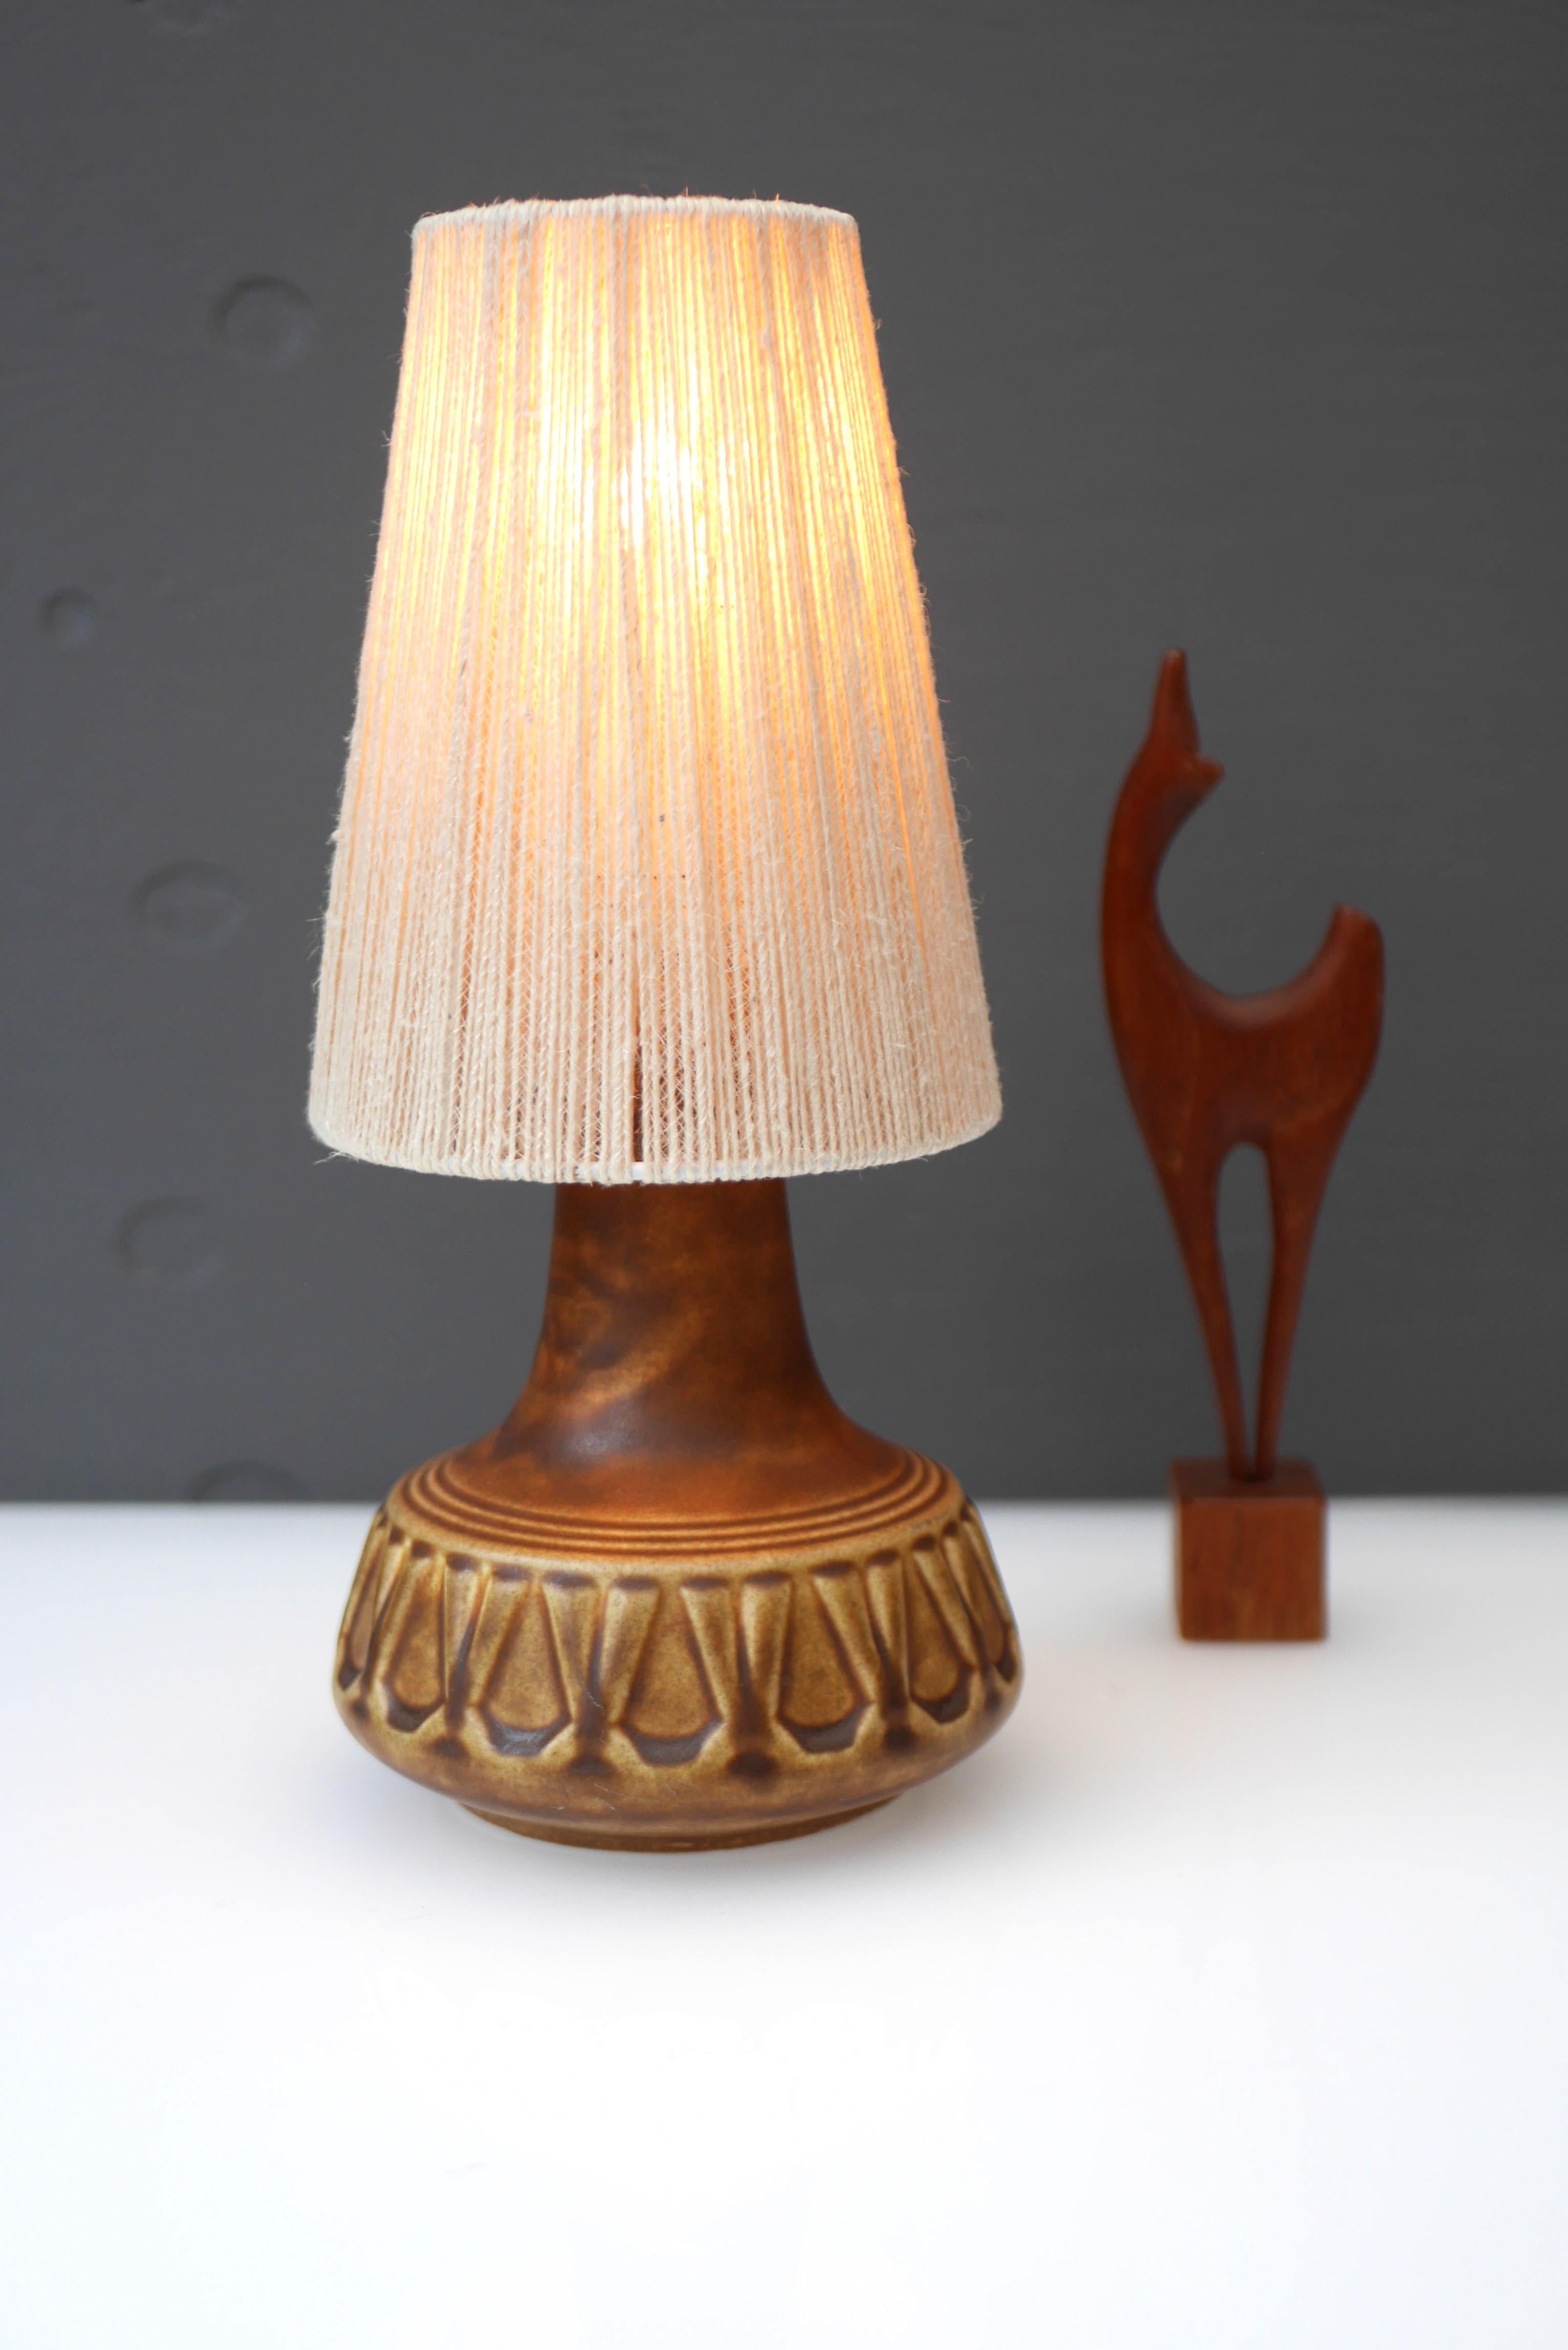 Ceramic Mid-century modern pottery table lamp from Söholm, Denmark.  For Sale